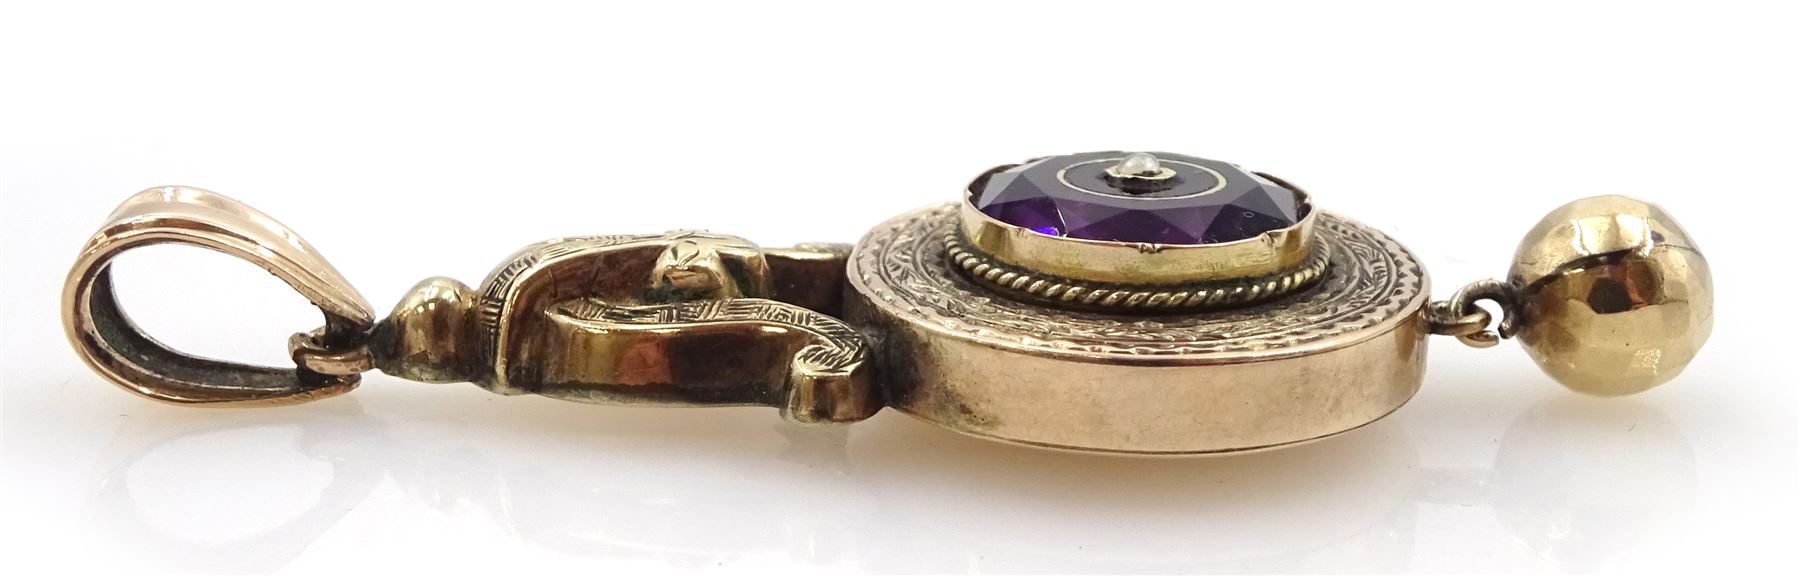 Victorian gold amethyst pendant and brooch with glazed back - Image 2 of 3